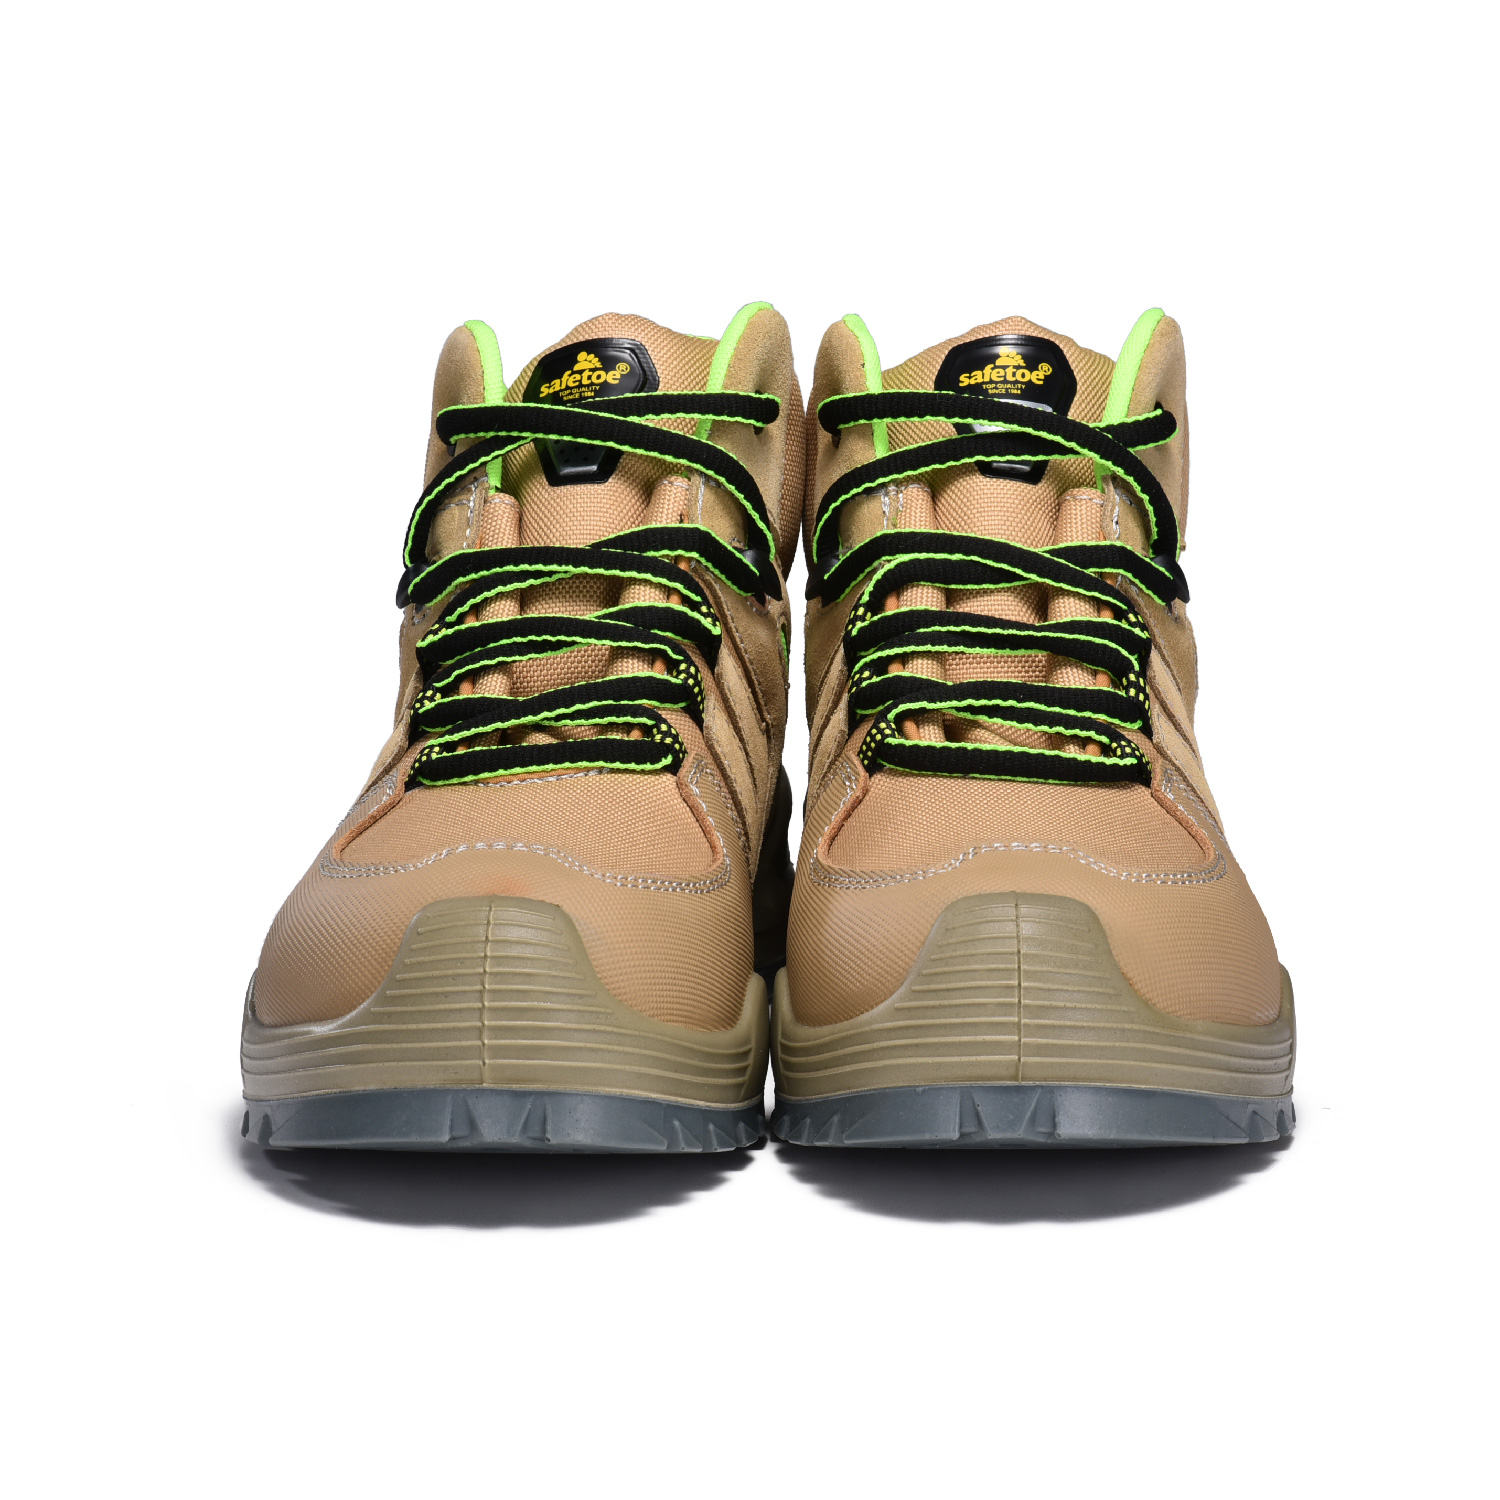 Breathable Summer S1P Safety Boots for Logistics M-8569